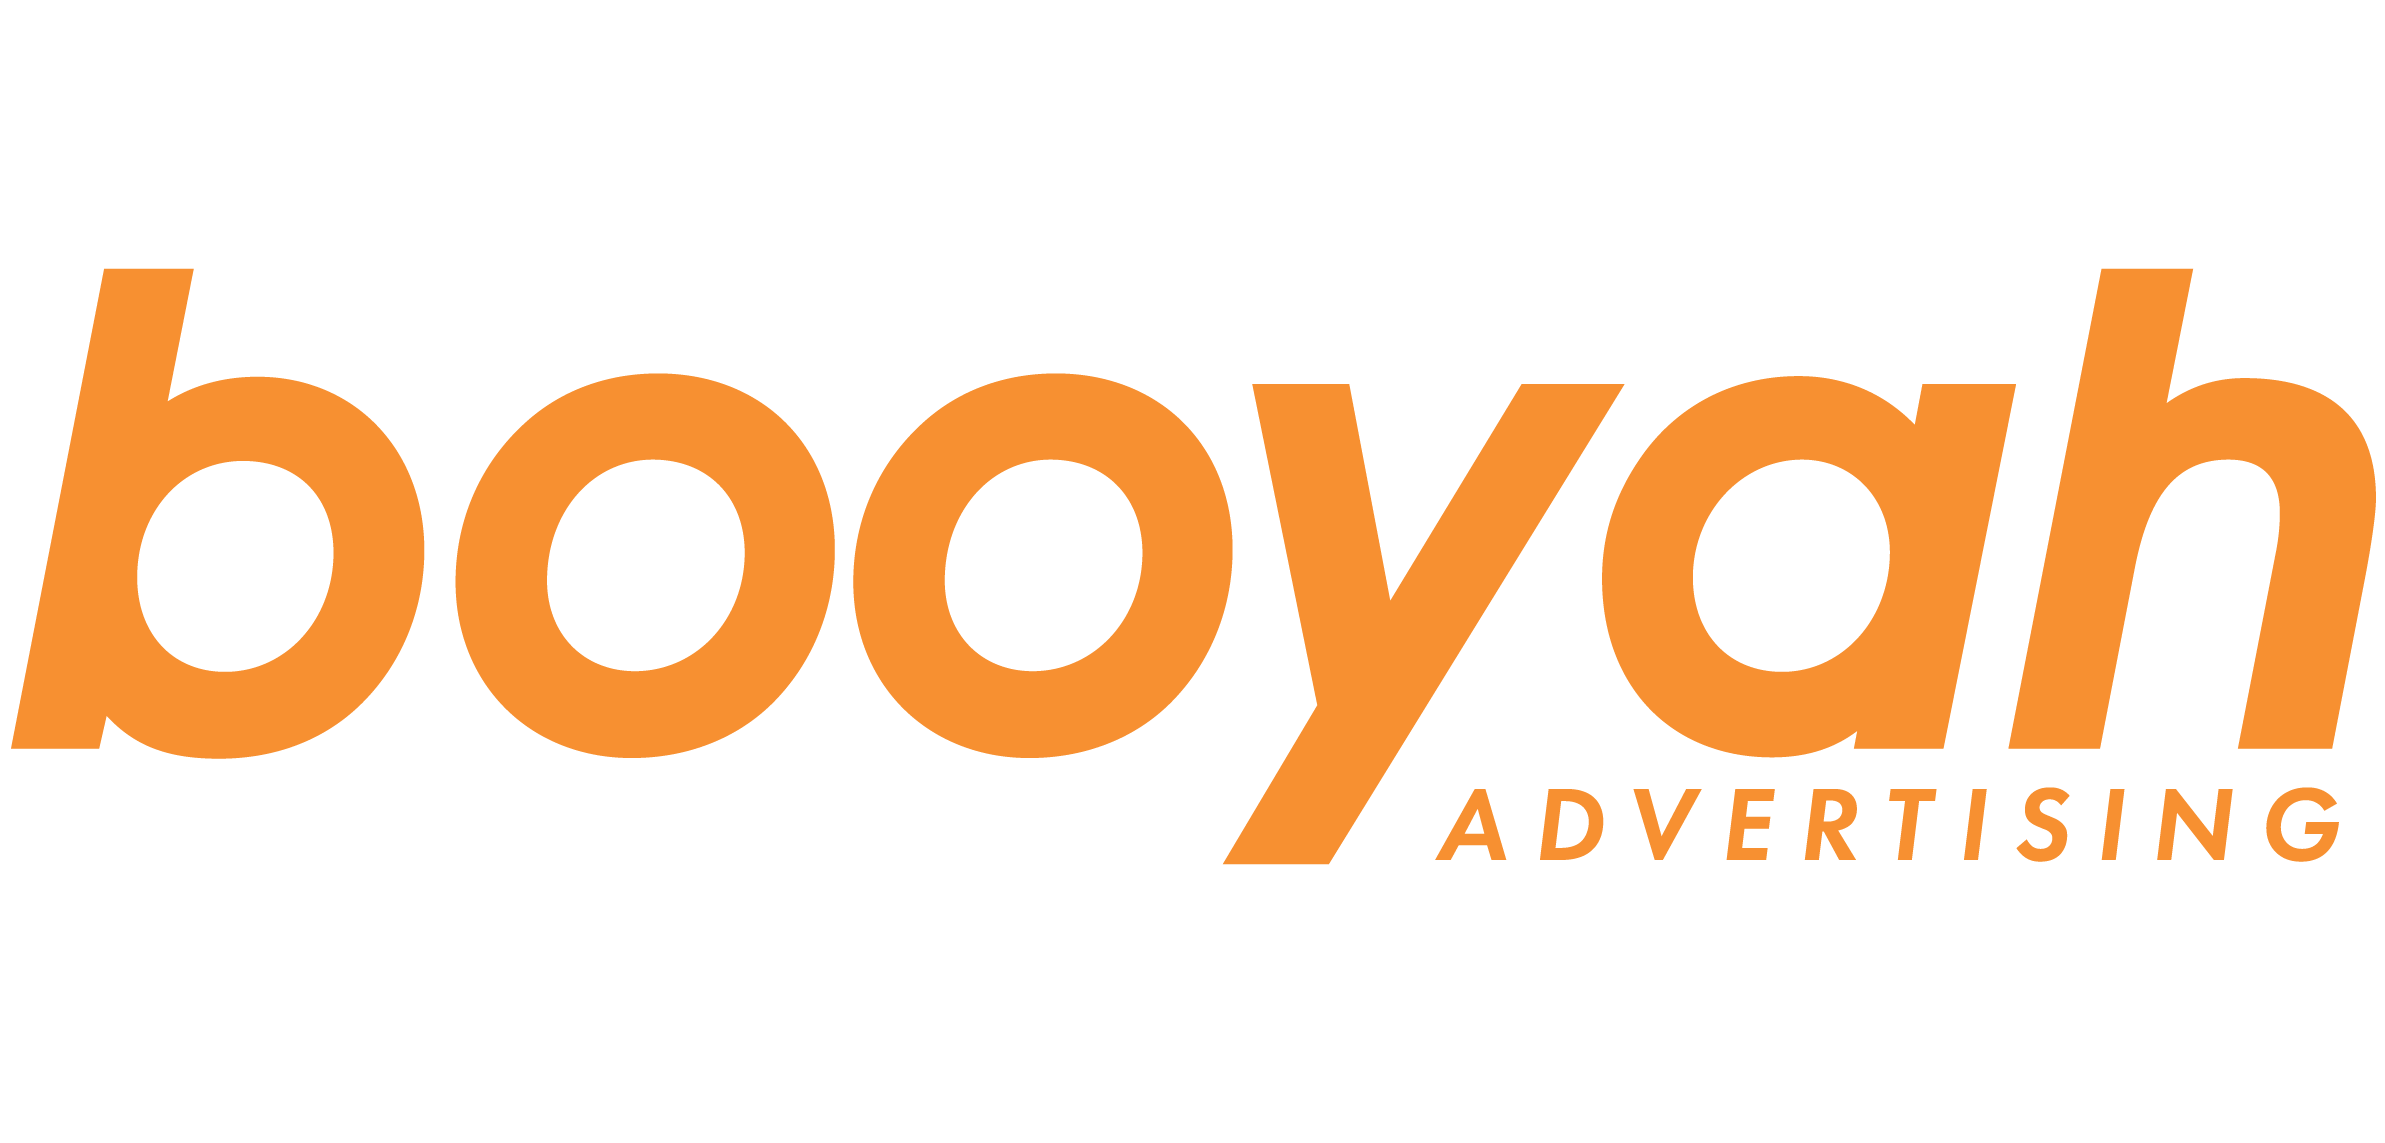 Booyah Advertising Named to Ad Age's Best Places to Work